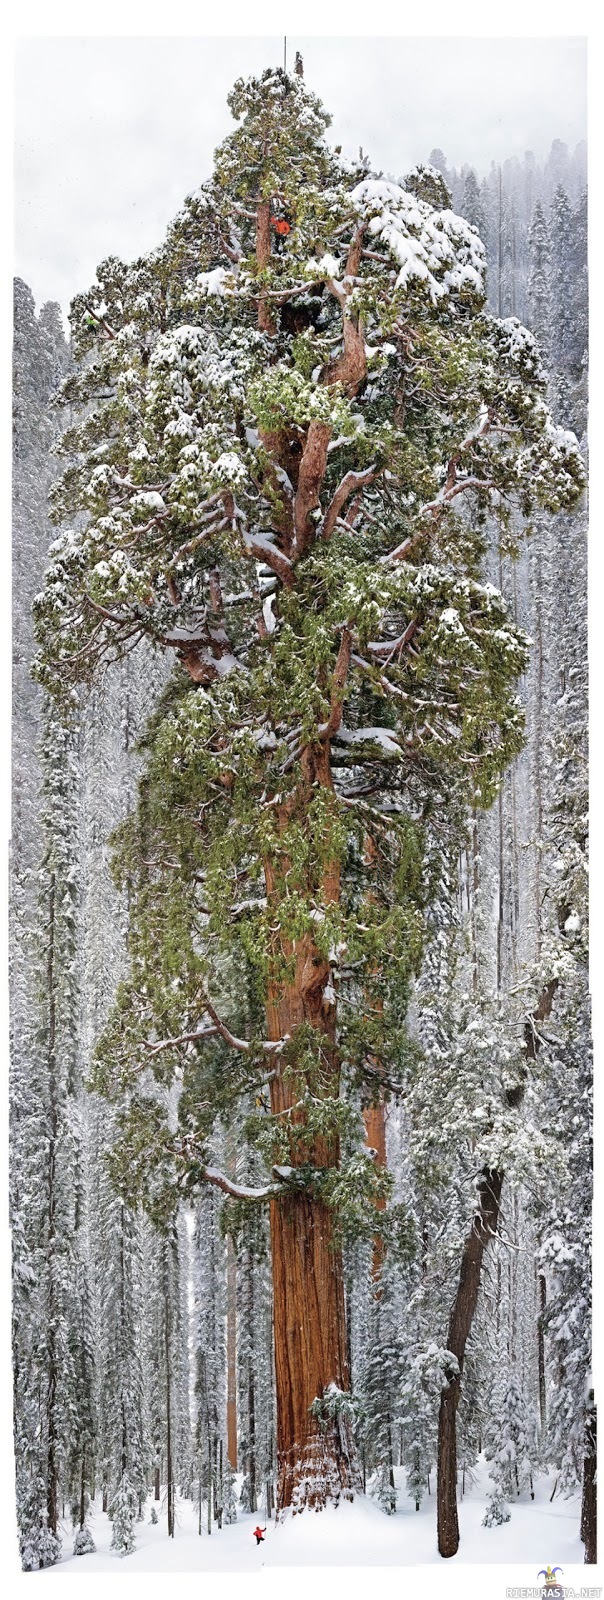 3.200 Year Old Giant Tree - The world&#039;s second-largest known tree, the President, in Sequoia National Park is photographed by National Geographic magazine photographer Michael &quot;Nick&quot; Nichols for the December 2012 issue. The final photograph is a mosaic of 126 images.